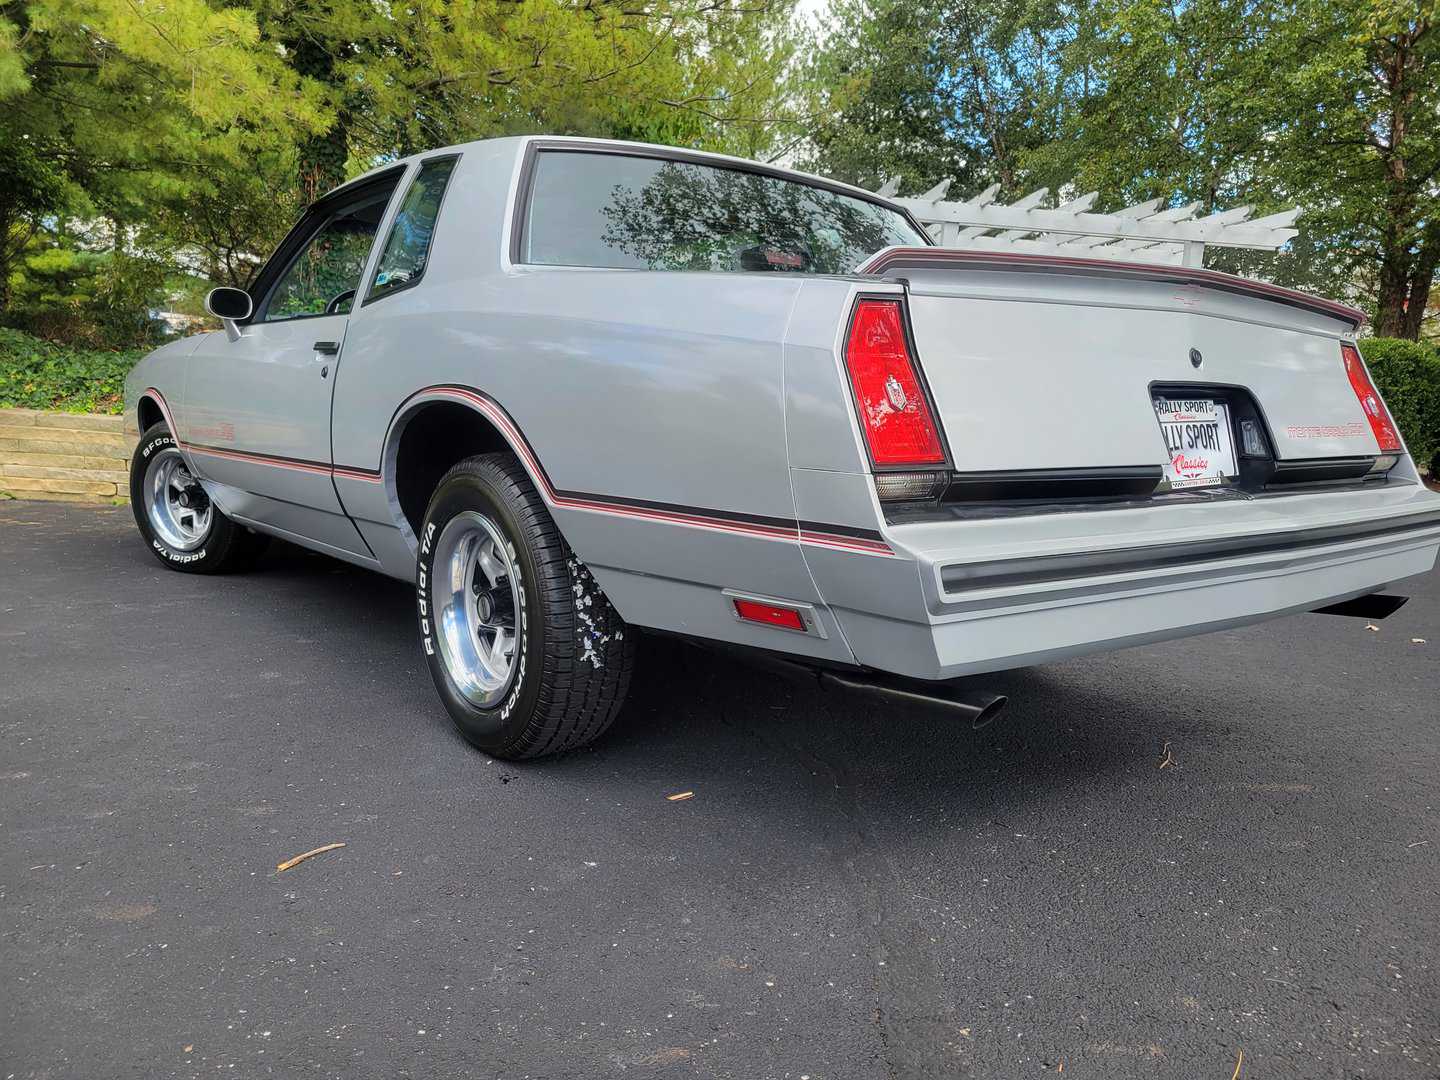 The rear end of a gray 1985 Monte Carlo SS parked in a parking lot.